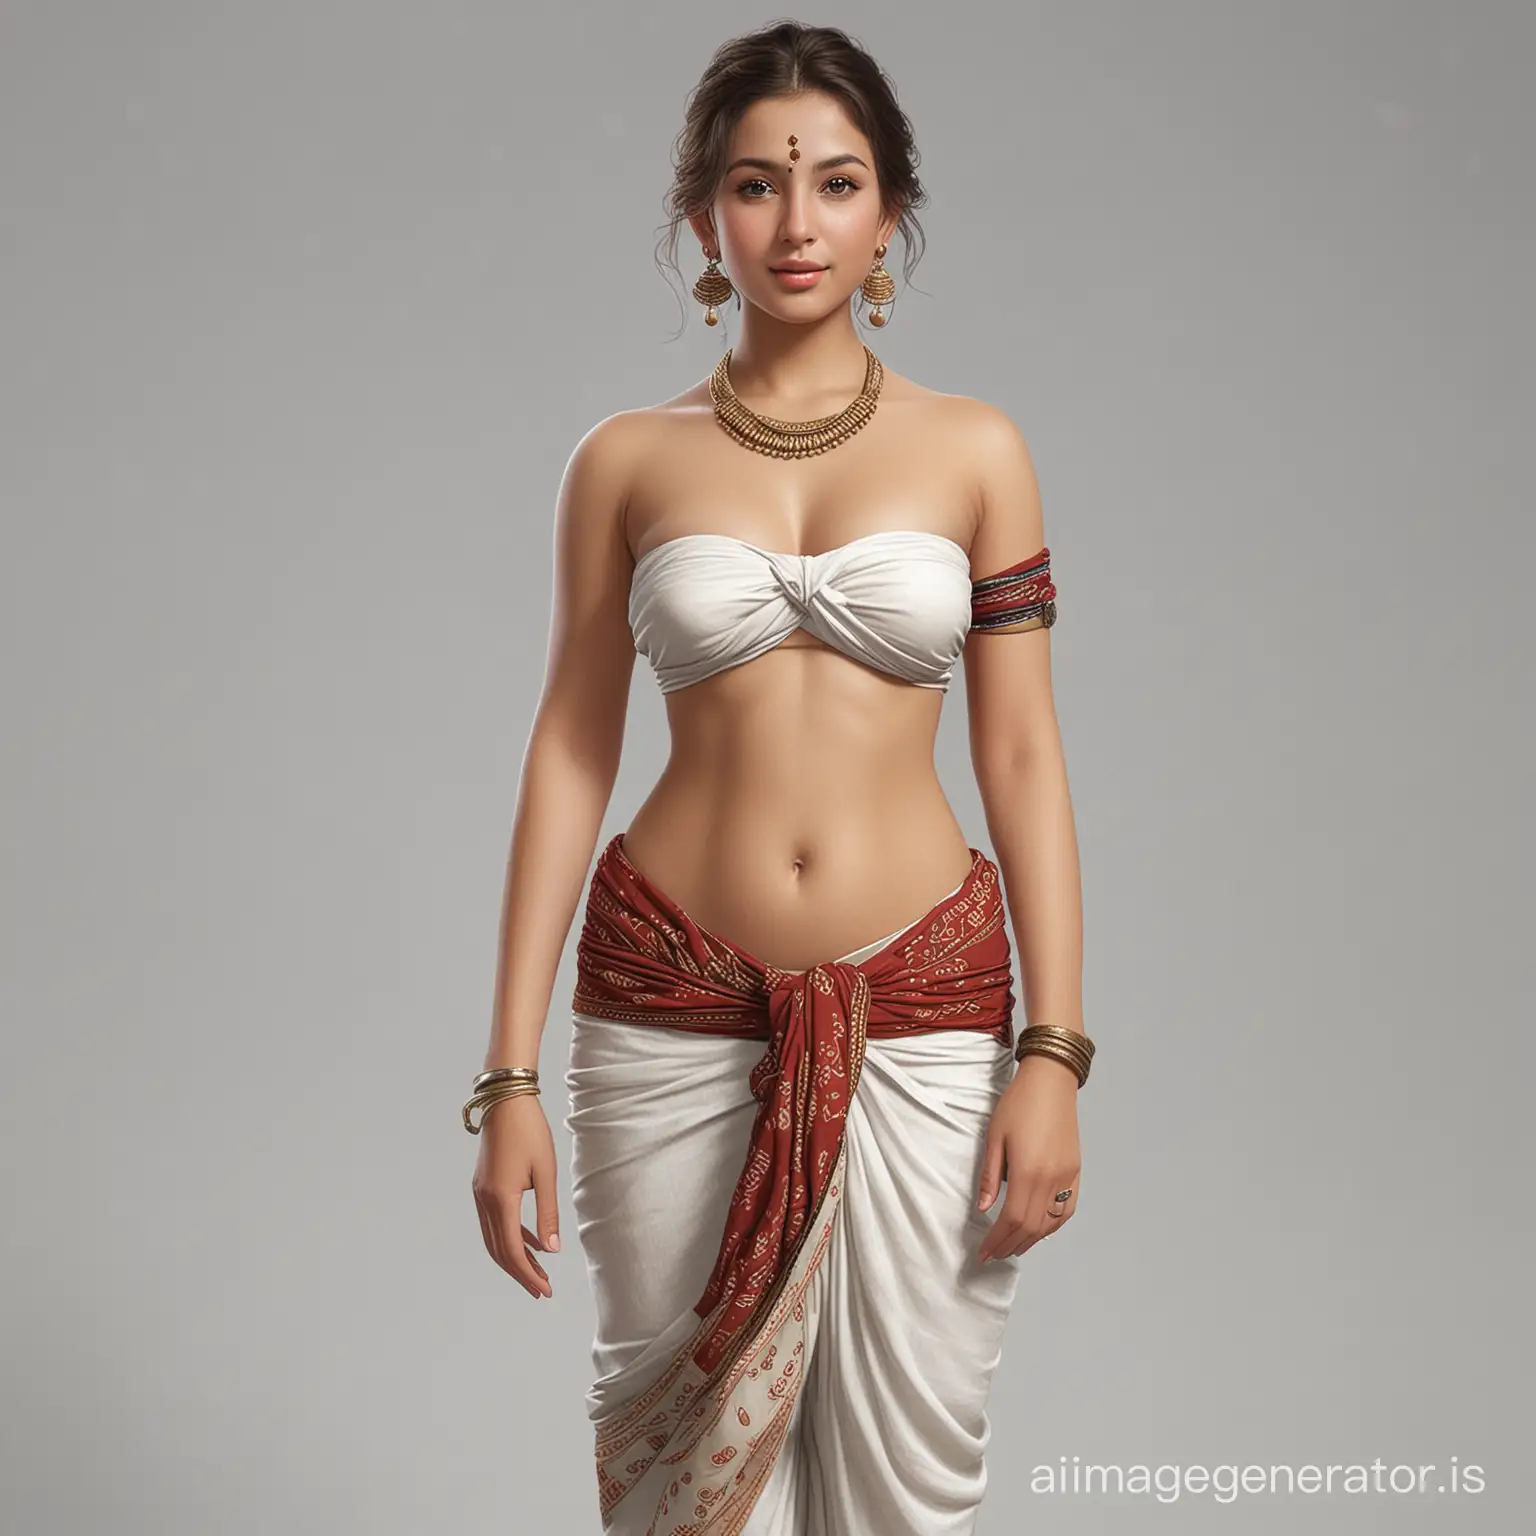 Young-Indian-Woman-in-Traditional-Attire-with-Earrings-and-Breast-Band